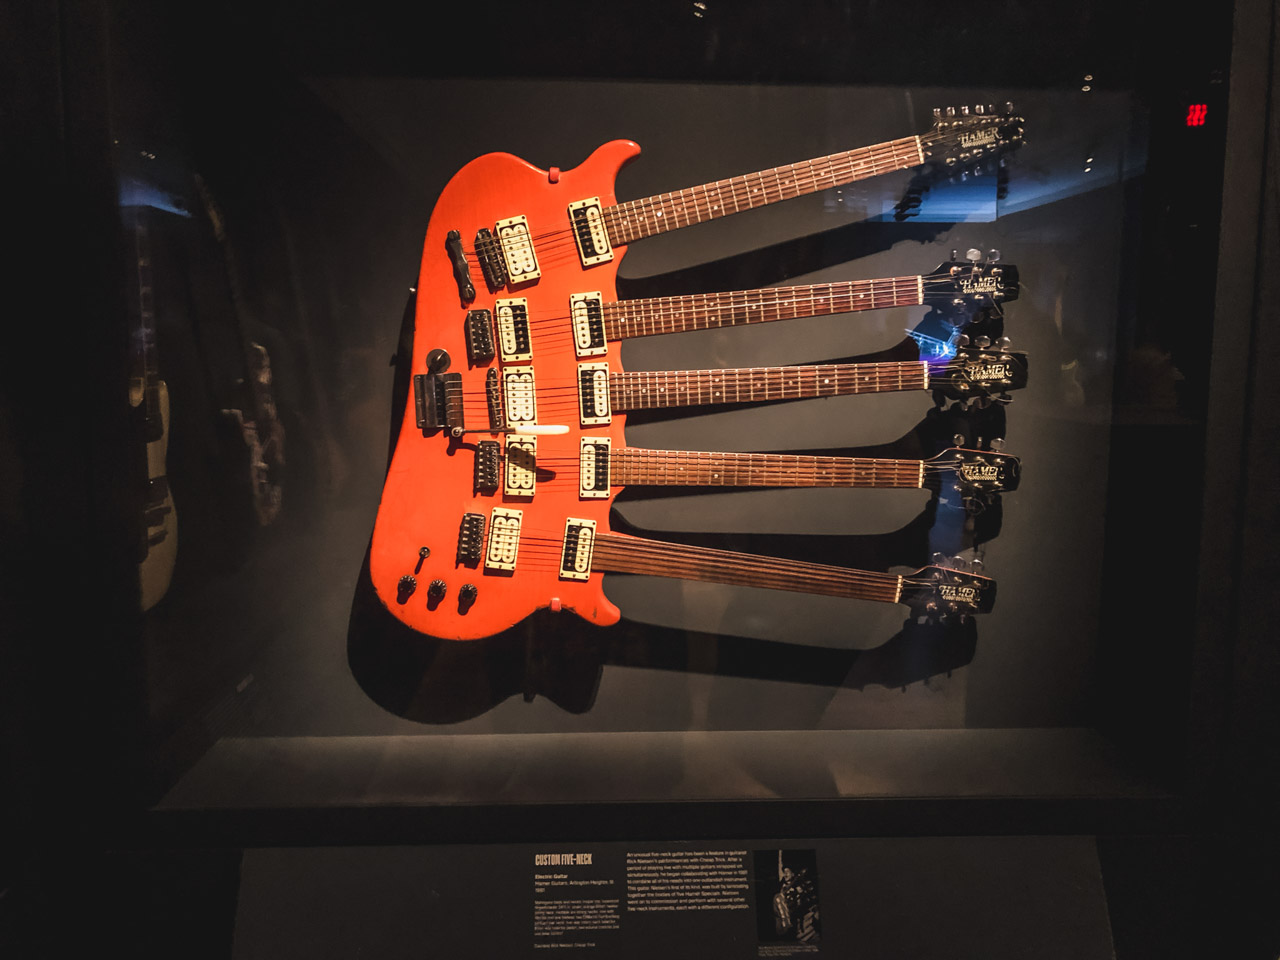 A custom five-neck guitar on display at The Met